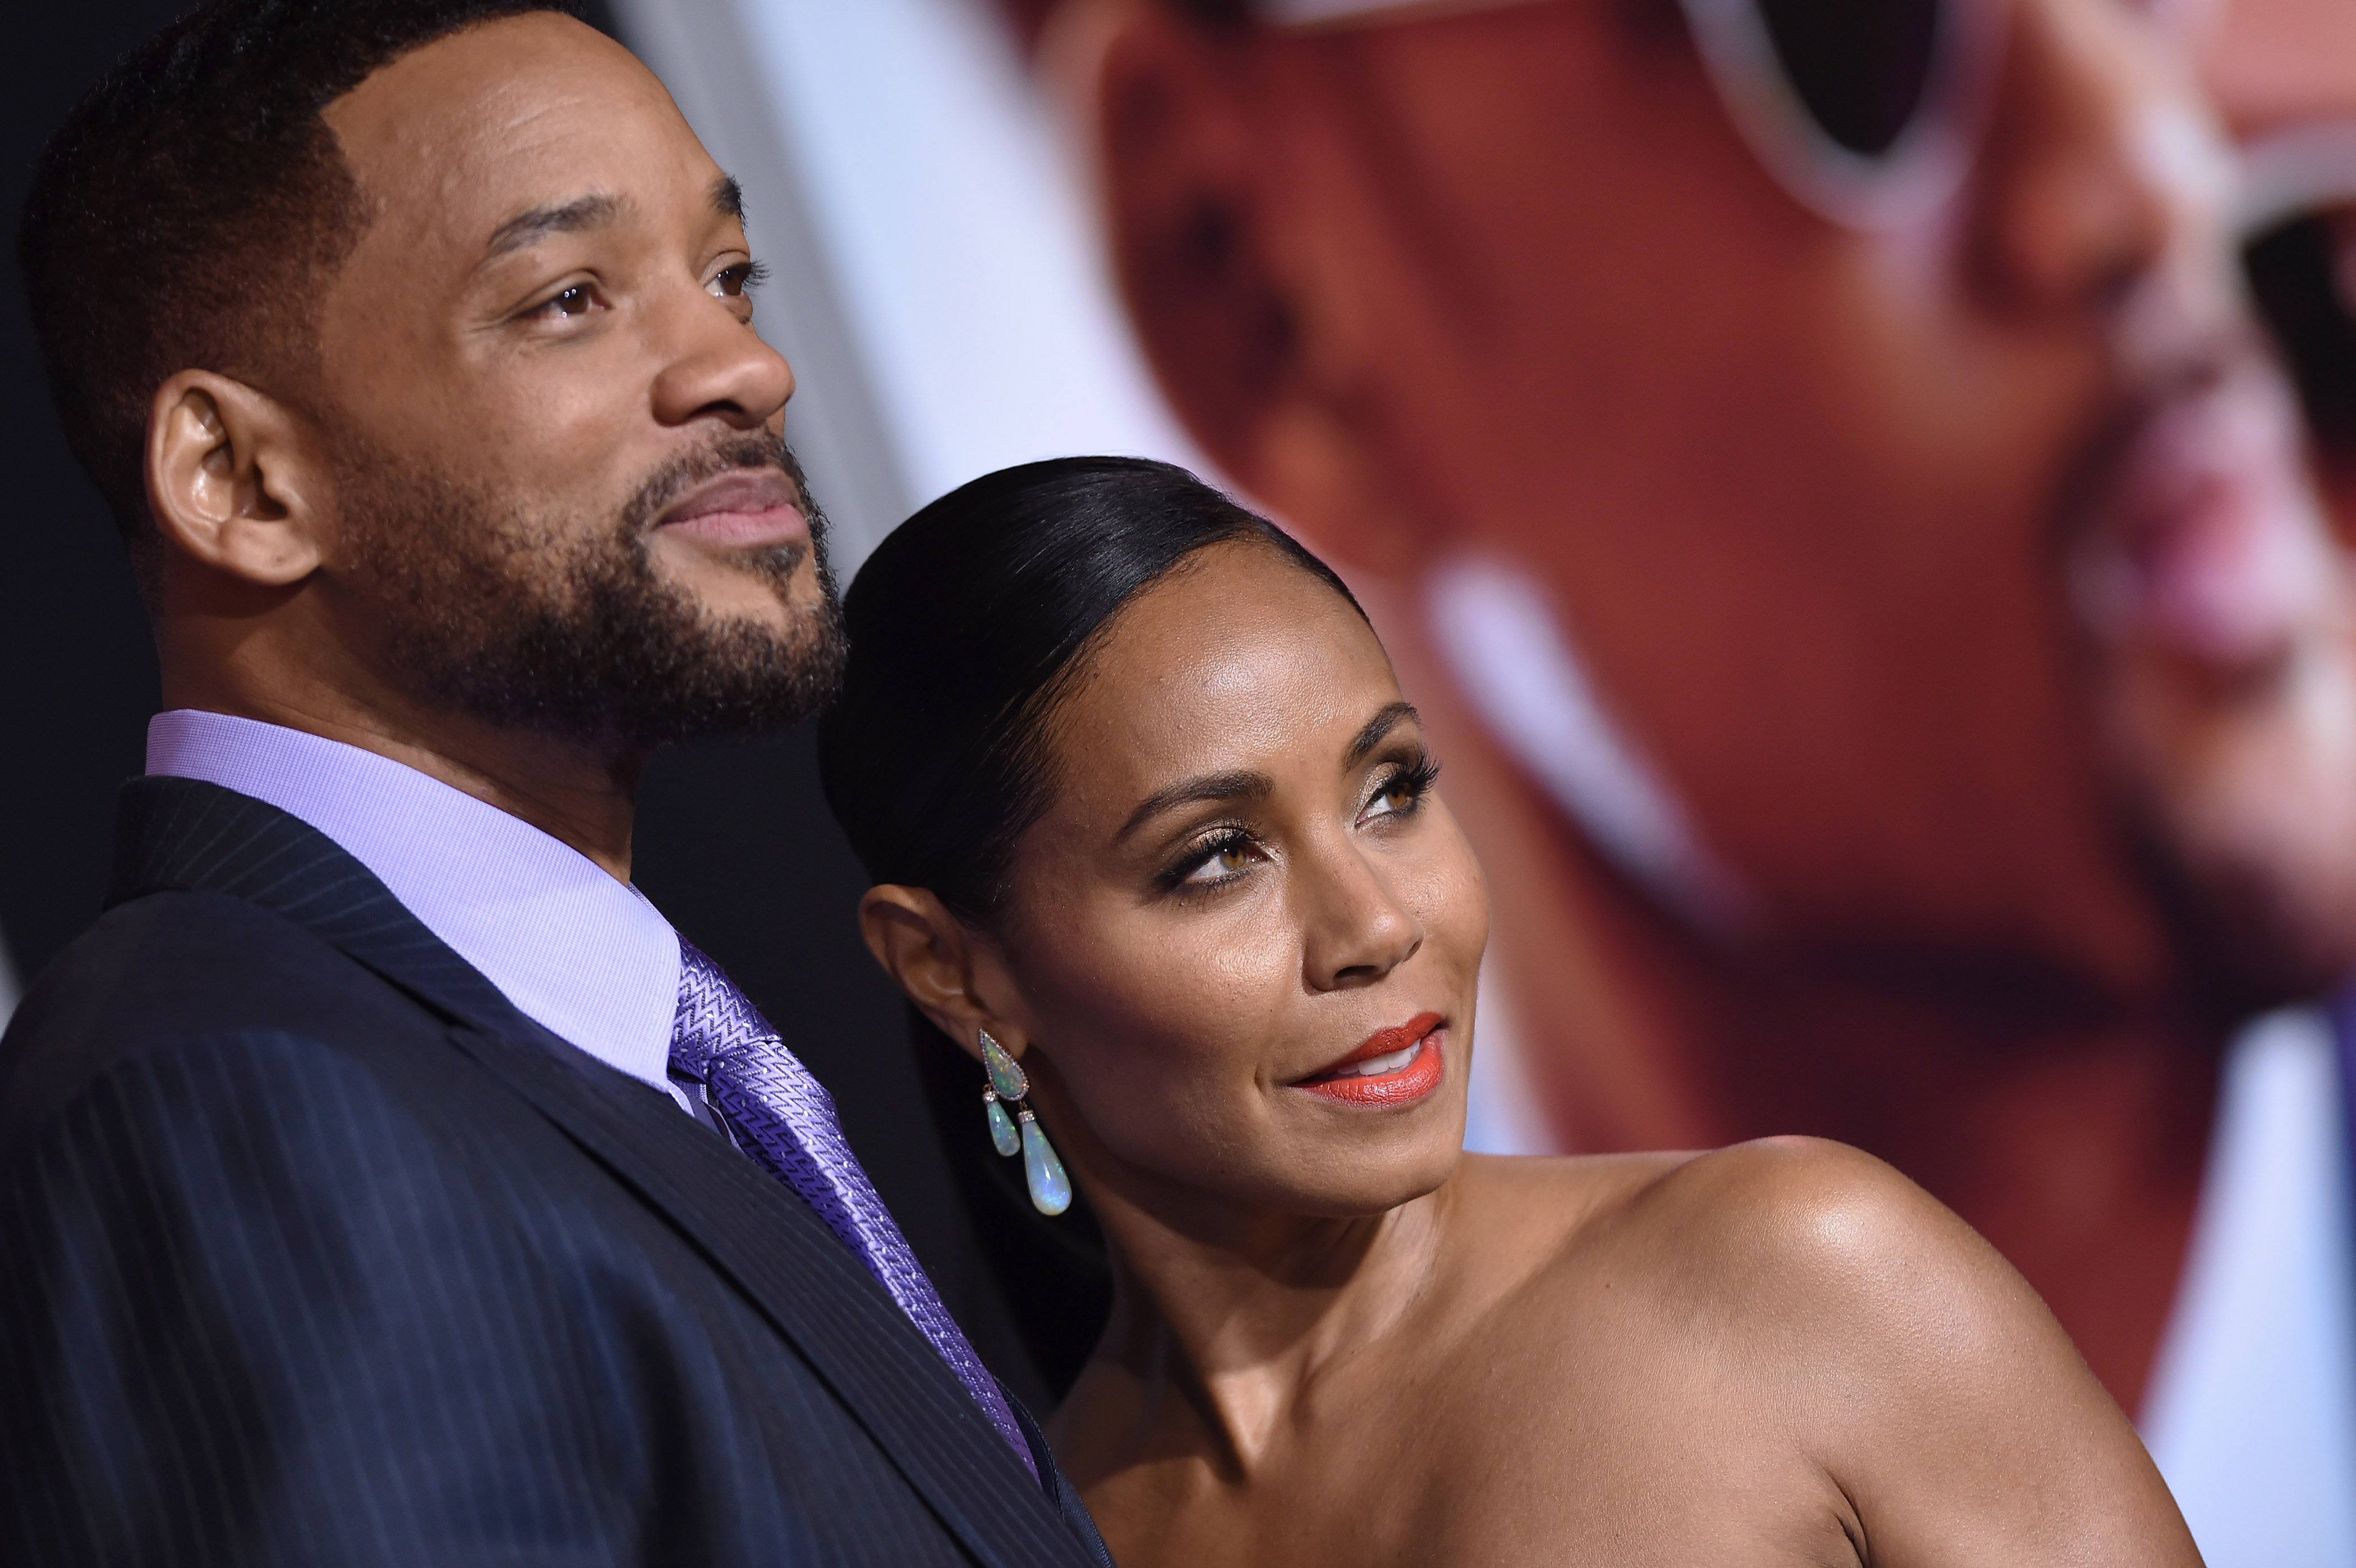 Actors Will Smith and Jada Pinkett Smith arrive at the Los Angeles World Premiere of Warner Bros. Pictures 'Focus' at TCL Chinese Theatre on February 24, 2015. | Photo: Getty Images